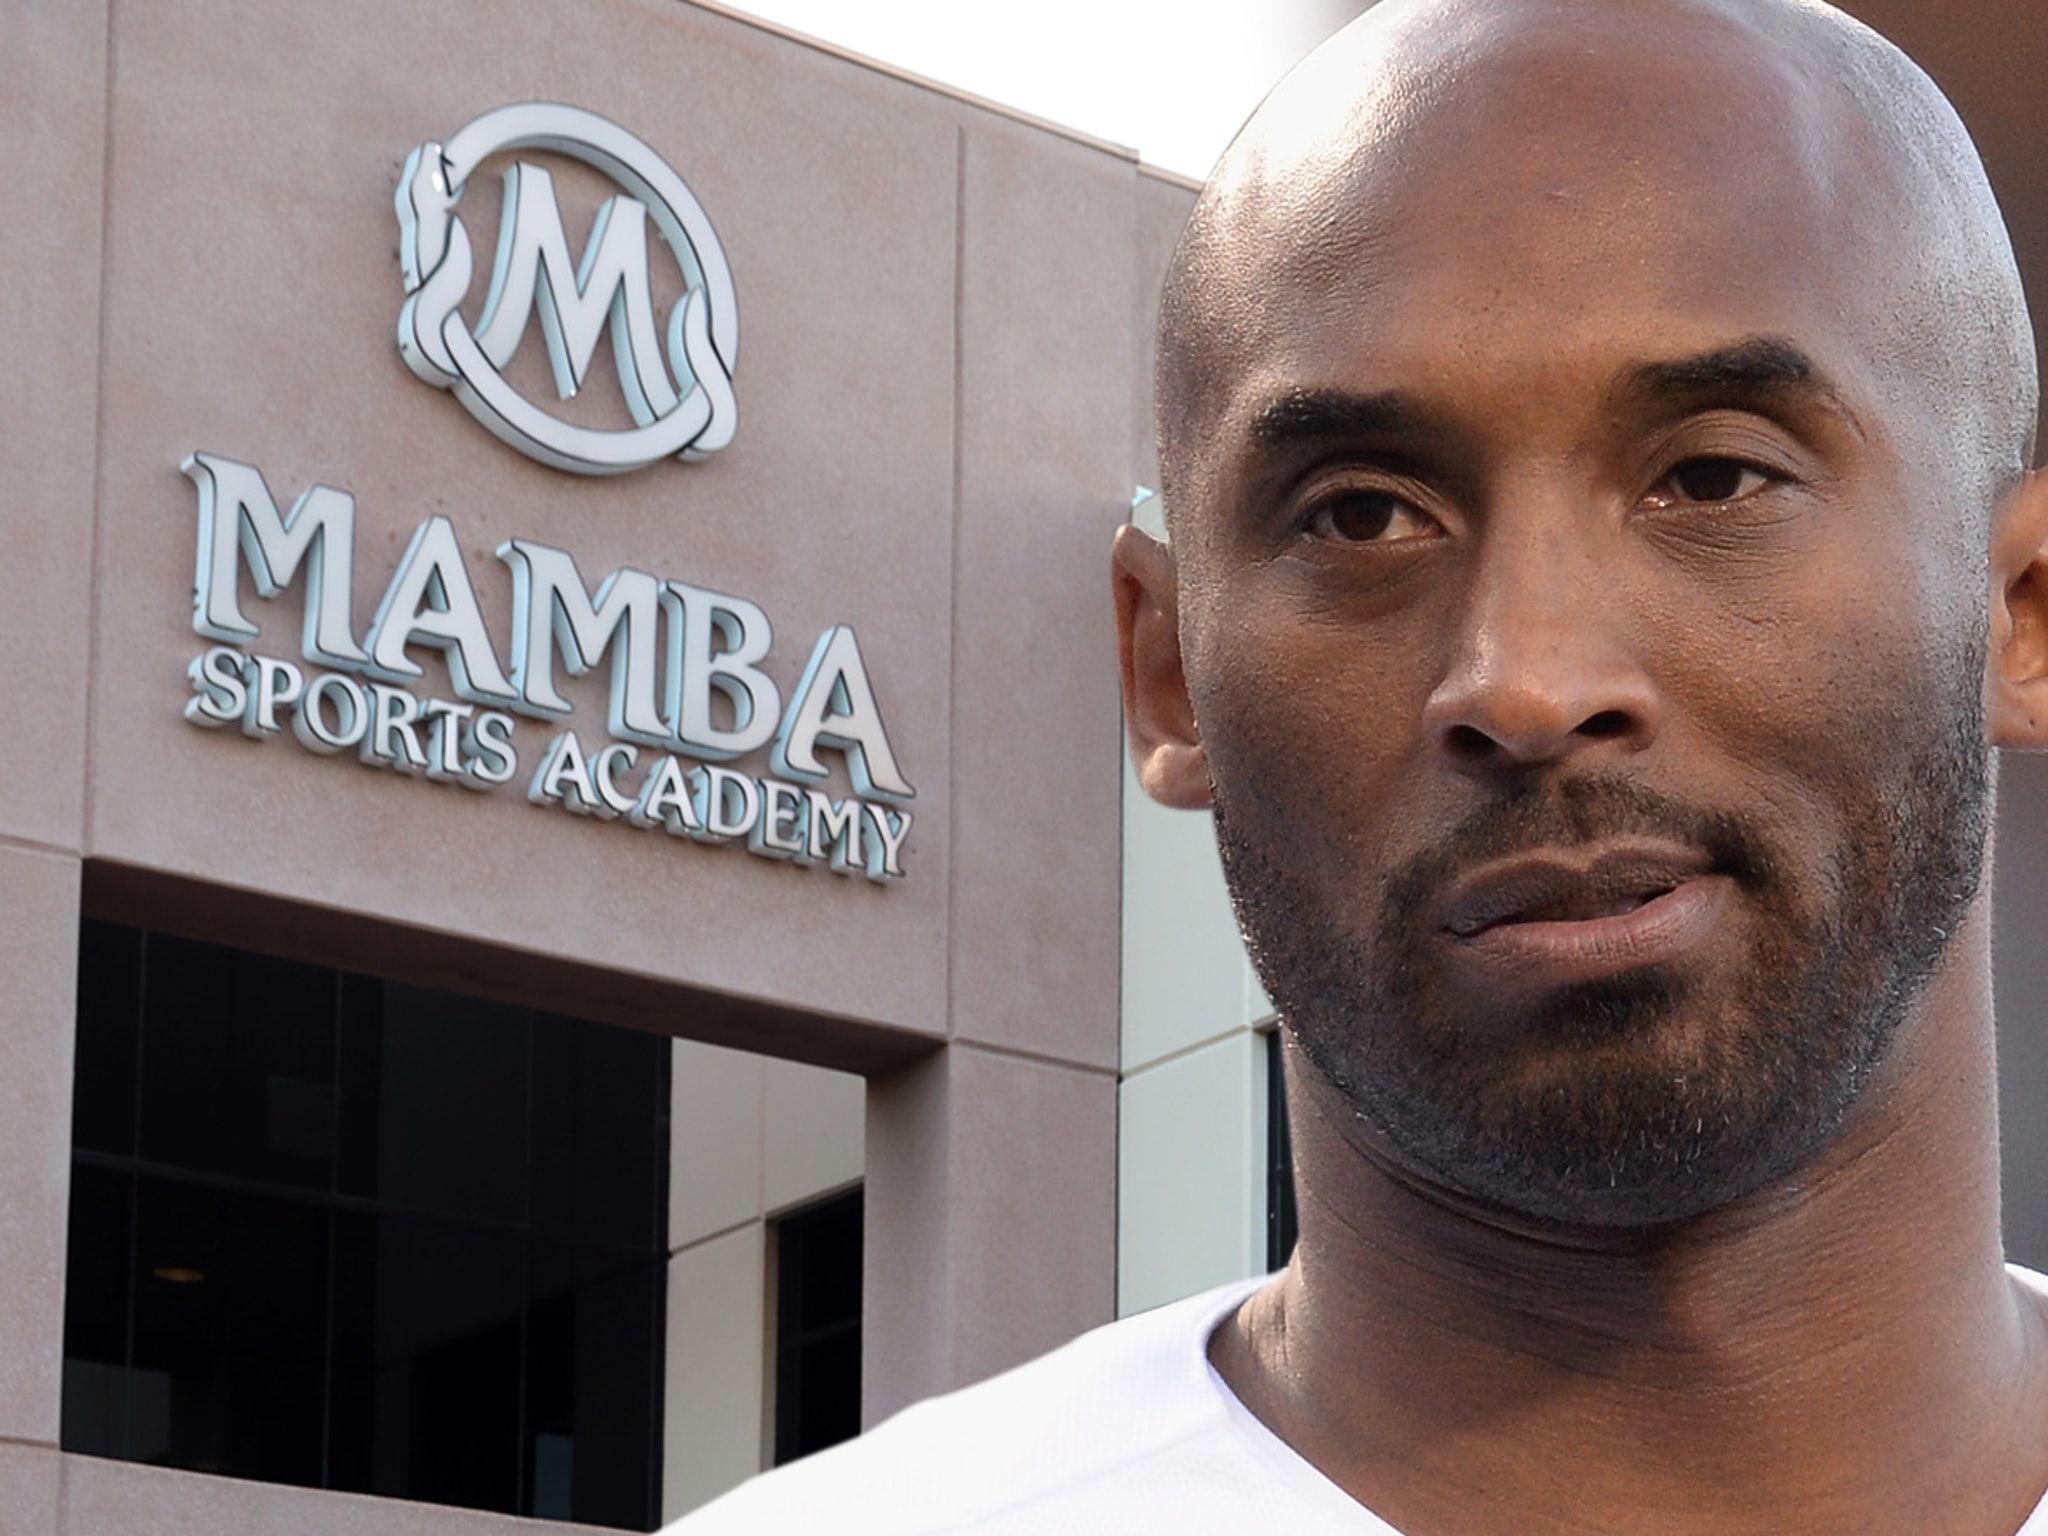 New Jersey Nets Day is Black Mamba Day, the meaning behind player numbers  and what a name means to fans #NetsPropaganda